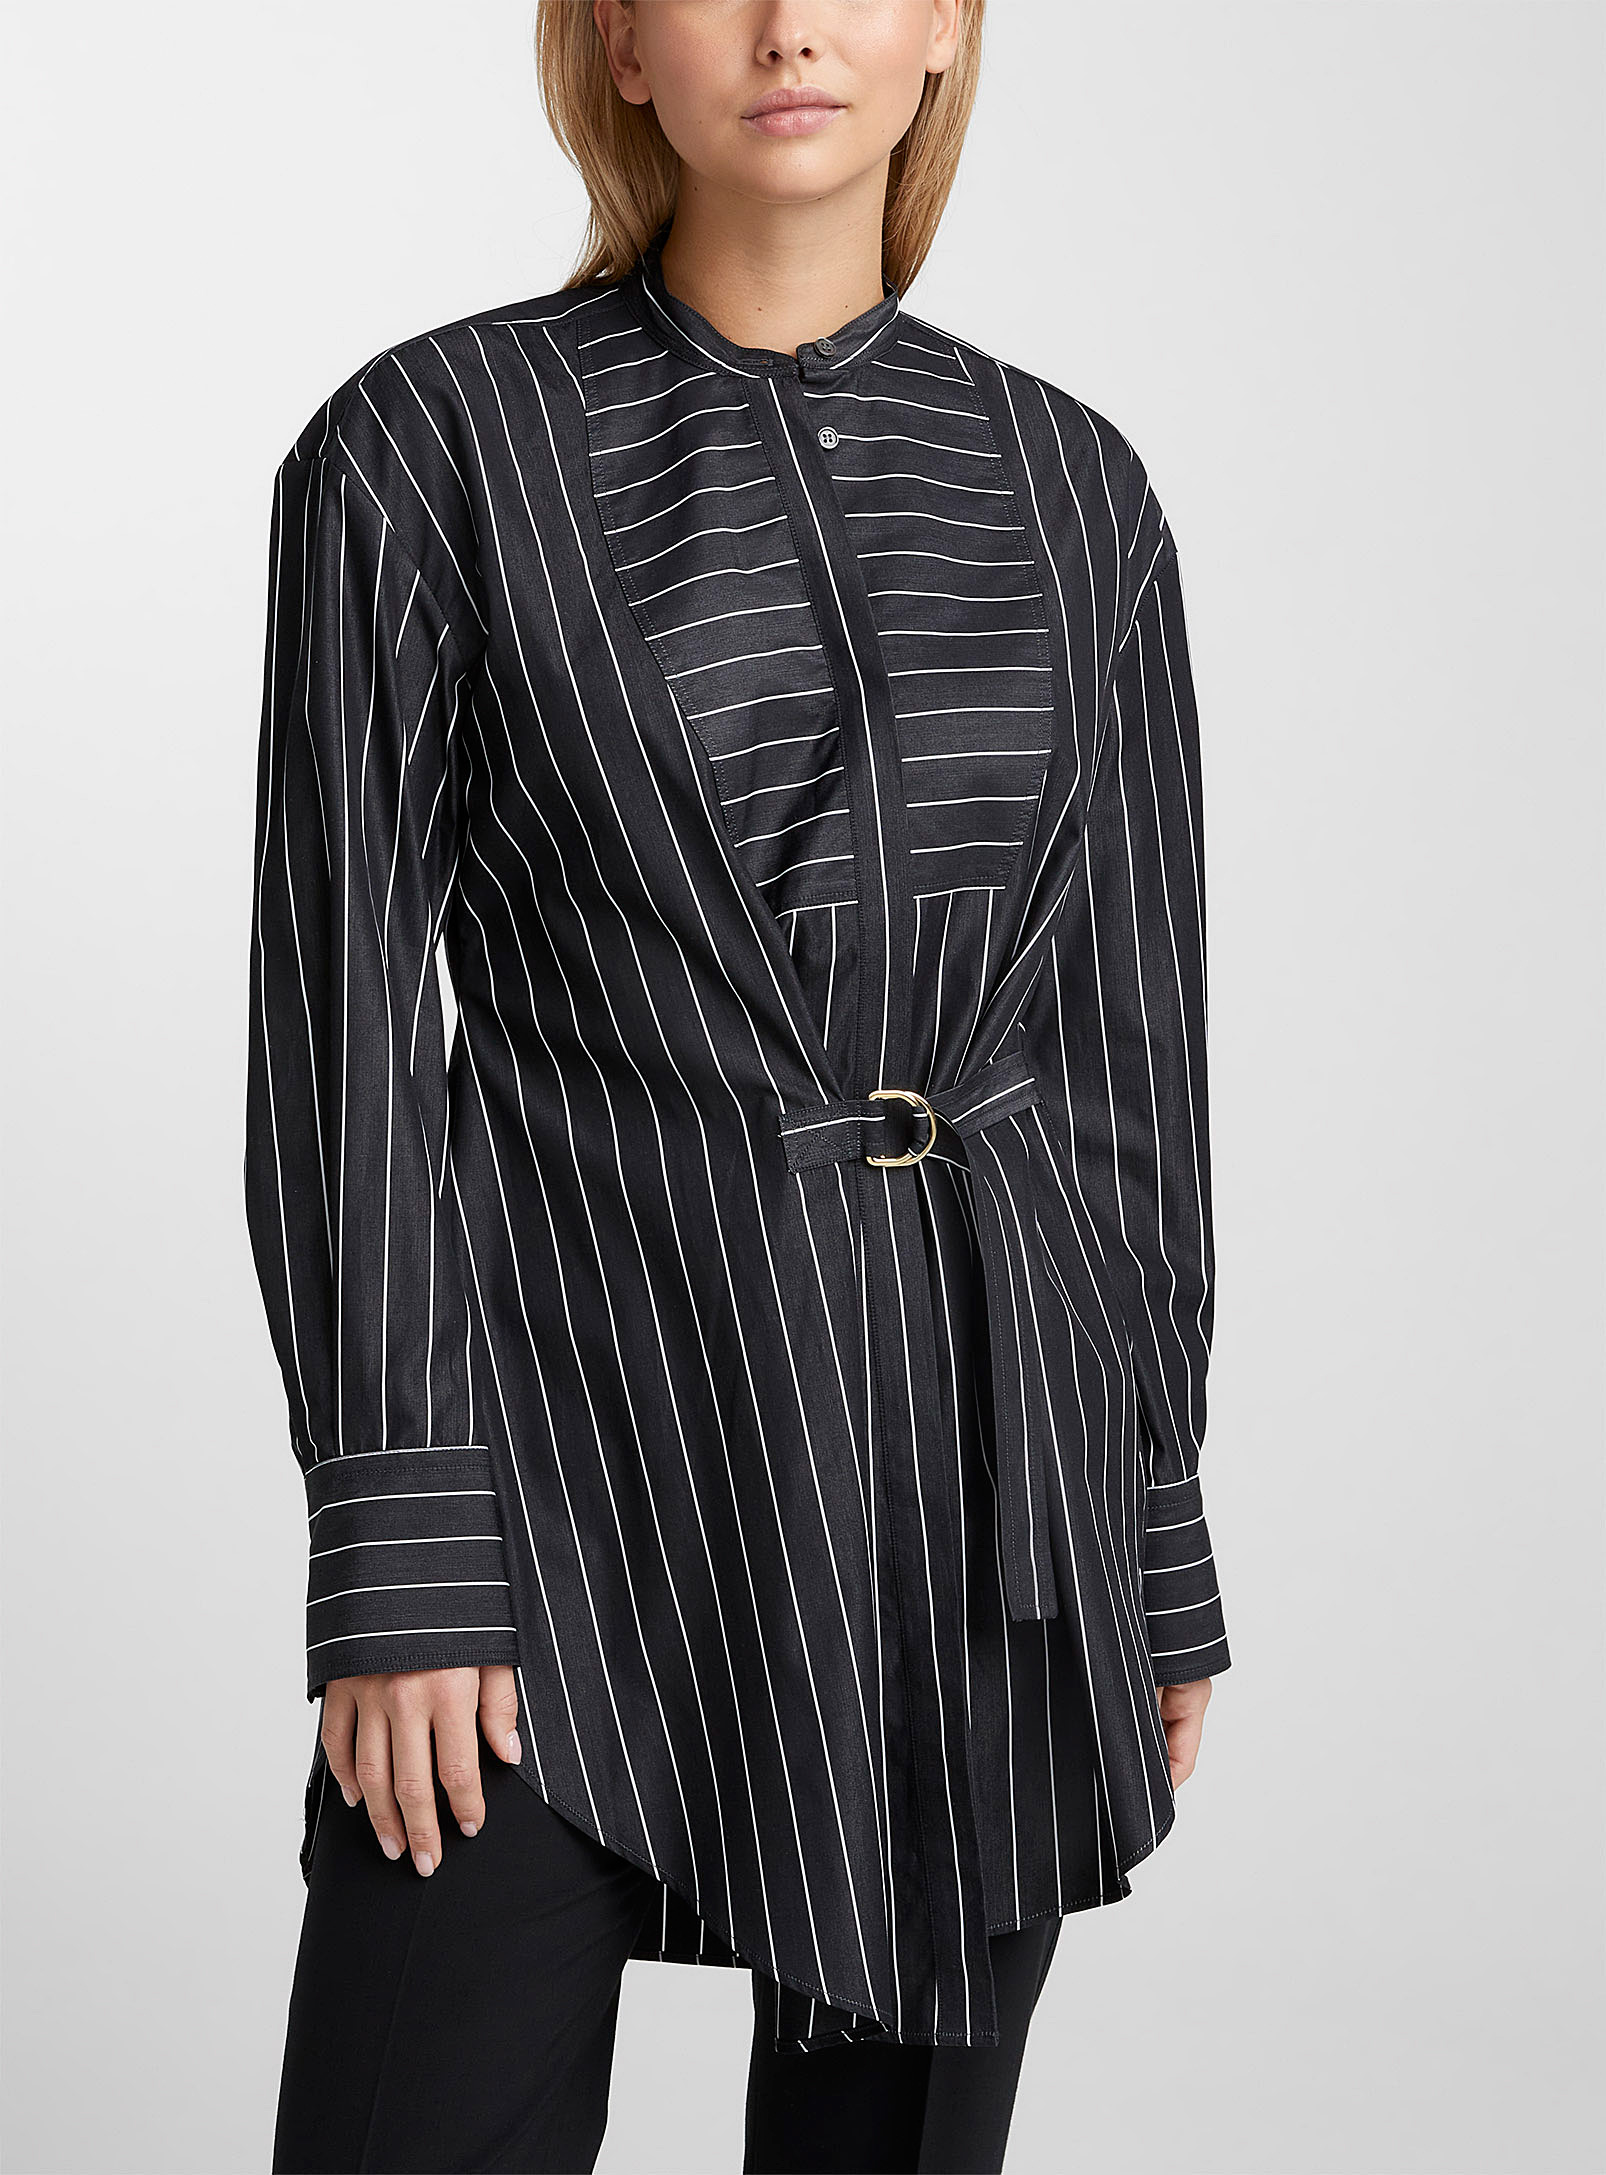 Jw Anderson Fitted Waist Long Shirt In Black And White